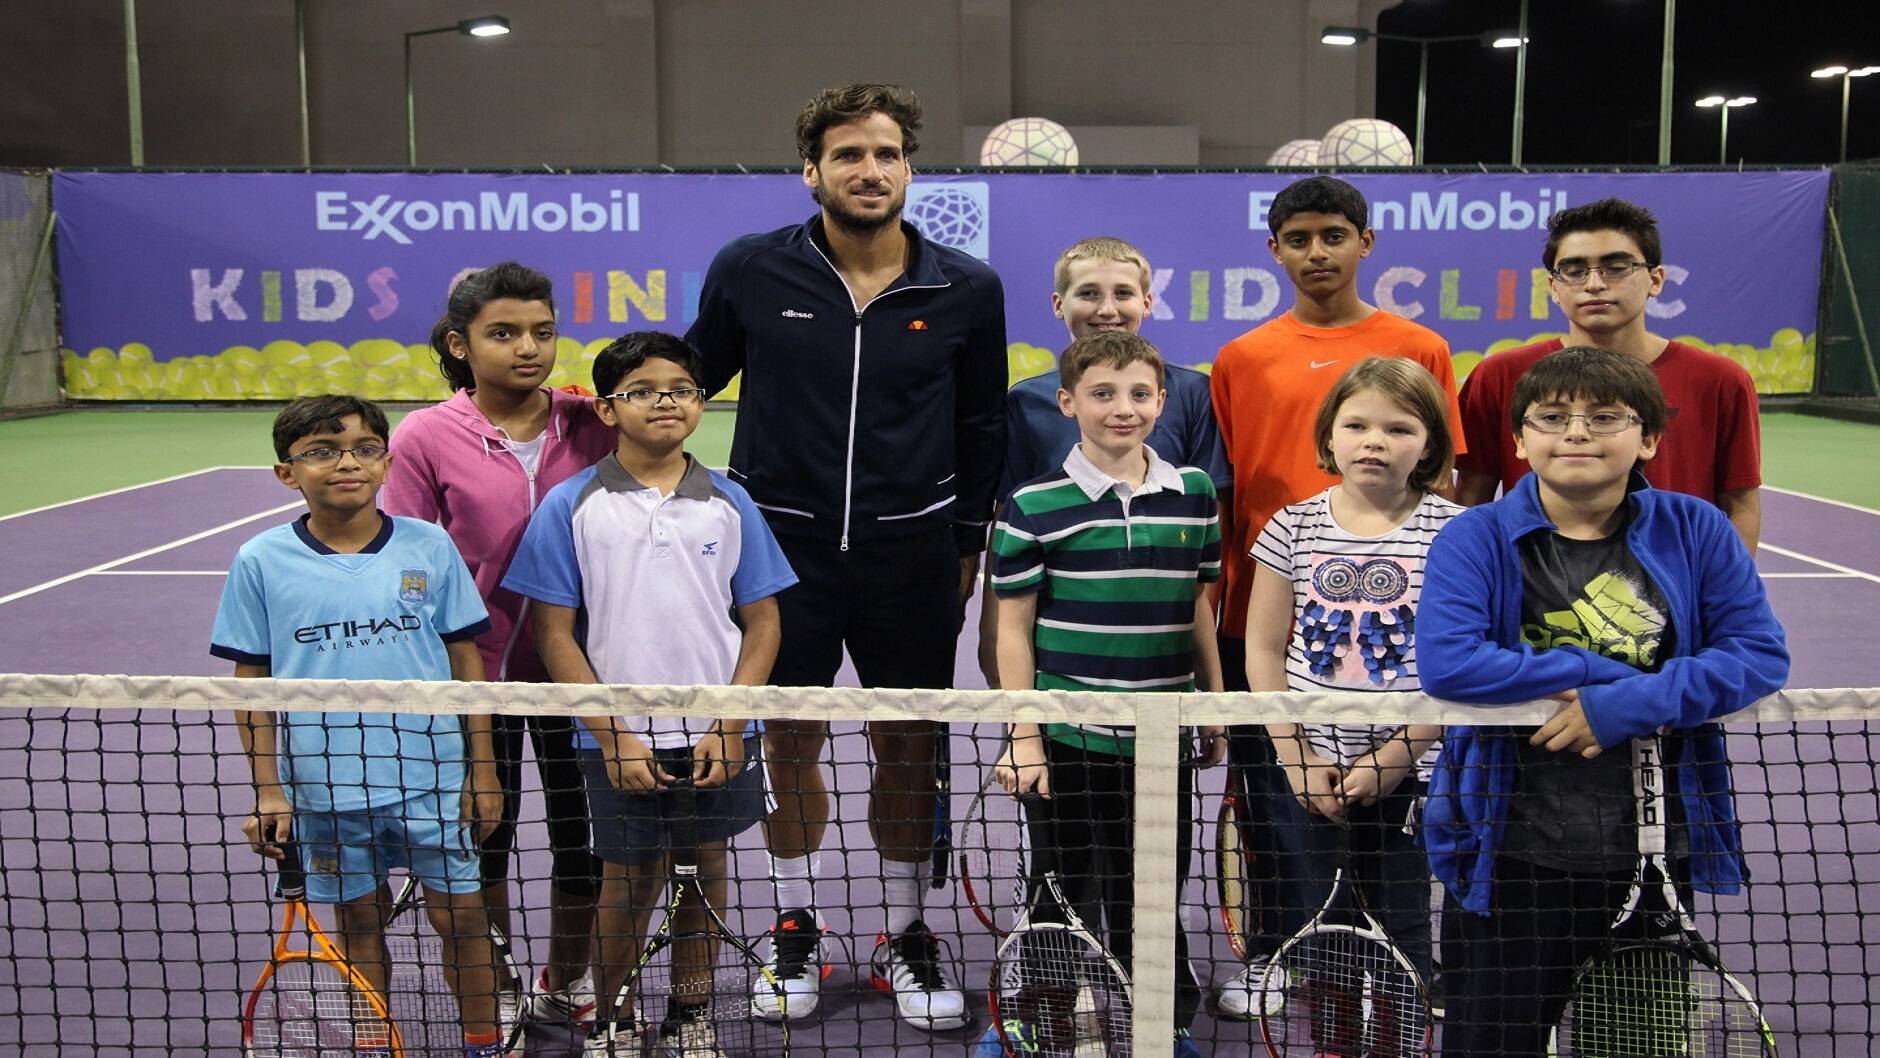 Spanish tennis player Feliciano Lopez, ranked number 5 in the Qatar ExxonMobil Open 2016, led a tennis clinic specially organized for children during the tournament.